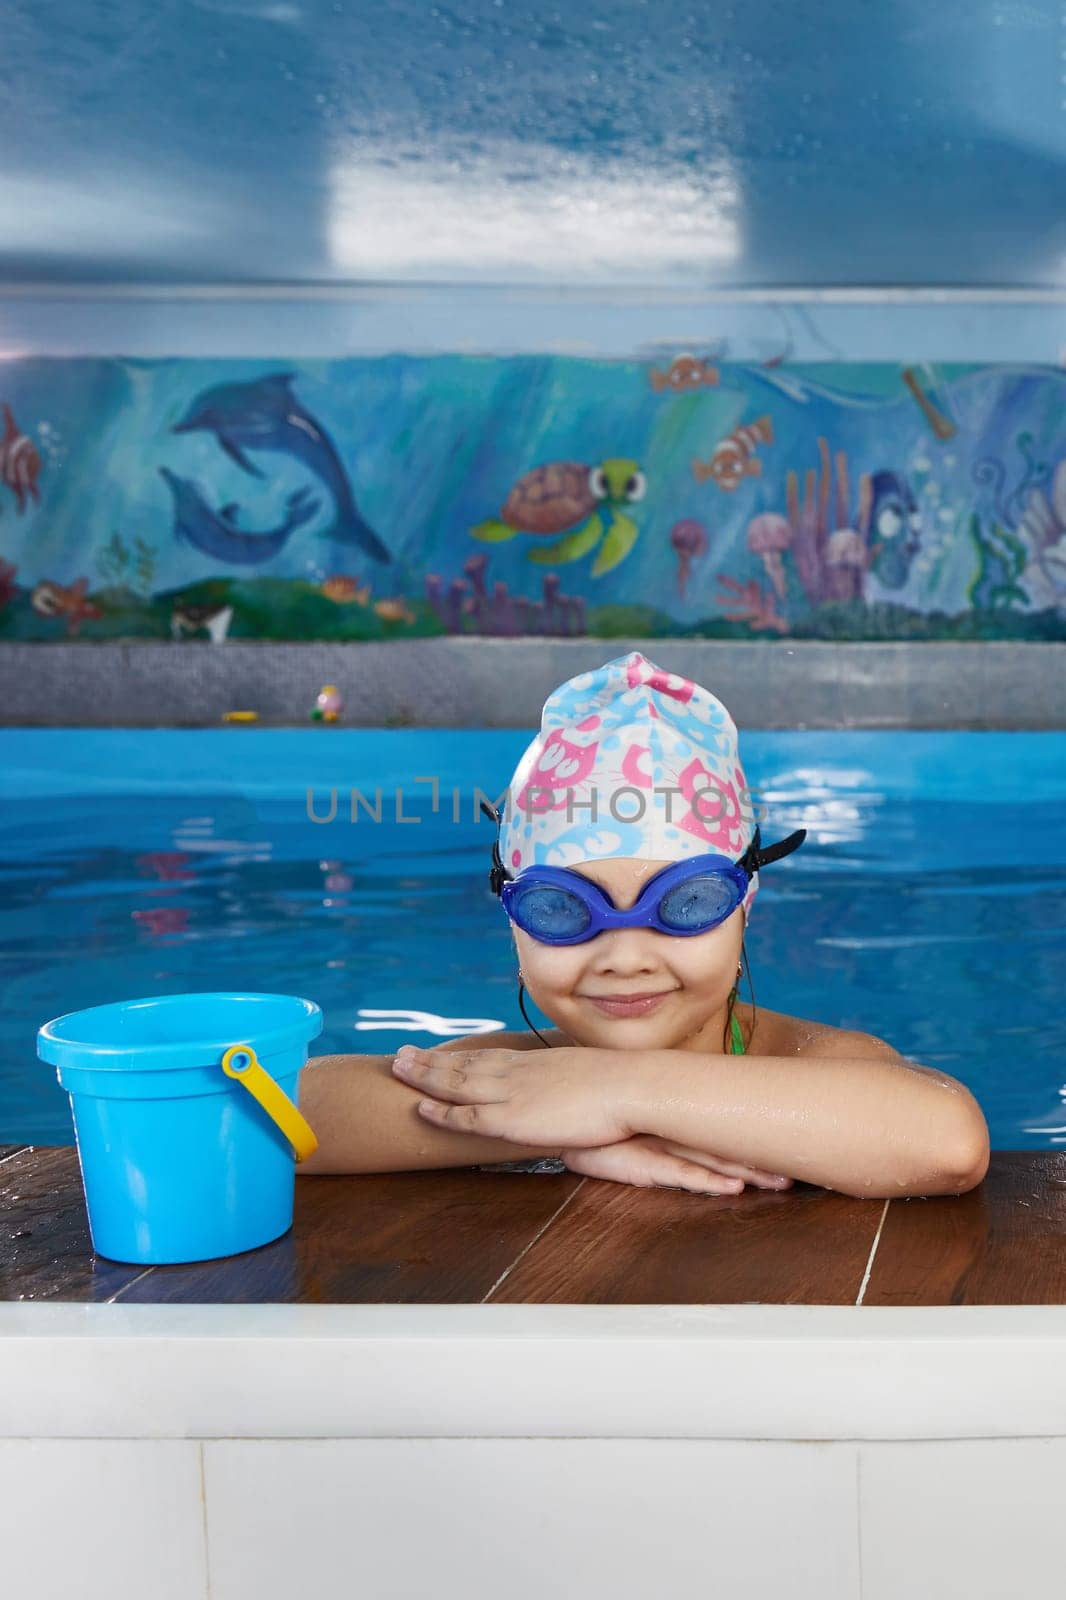 Kids taking a break during swimming class in indoor pool by Mariakray